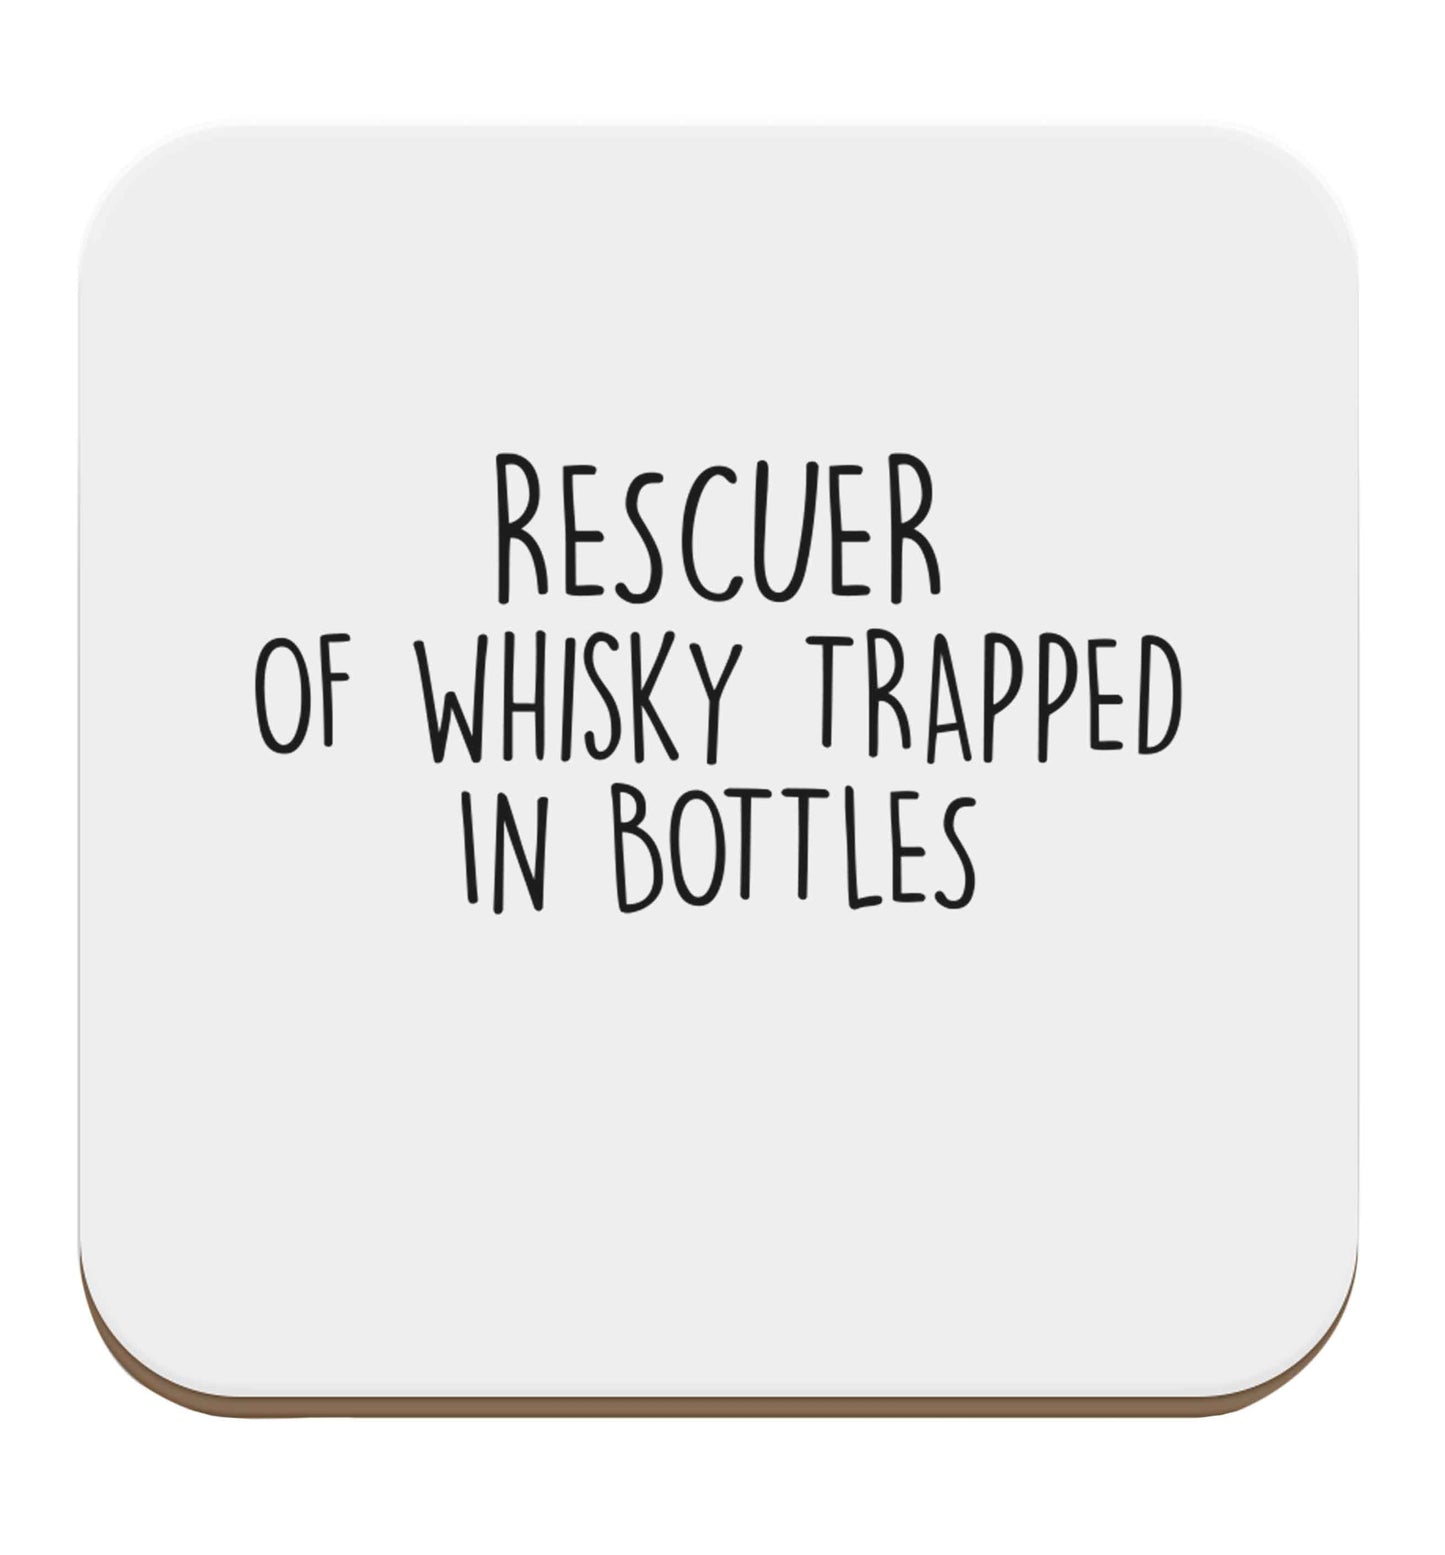 Rescuer of whisky trapped in bottles set of four coasters